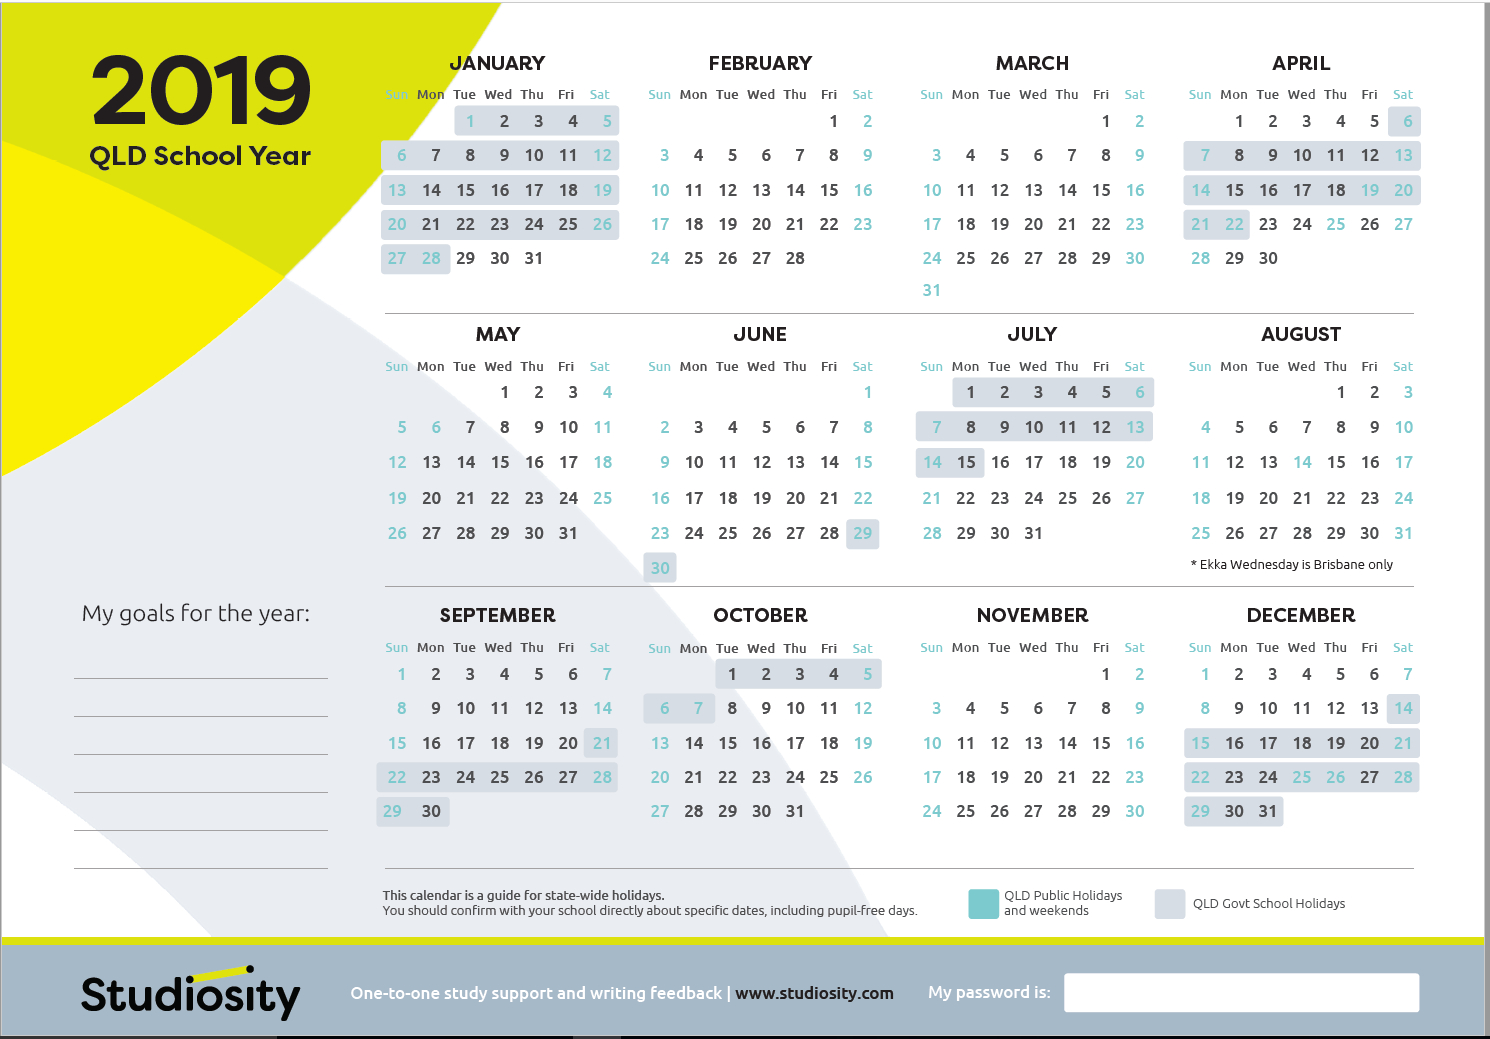 School Terms And Public Holiday Dates For Qld In 2019